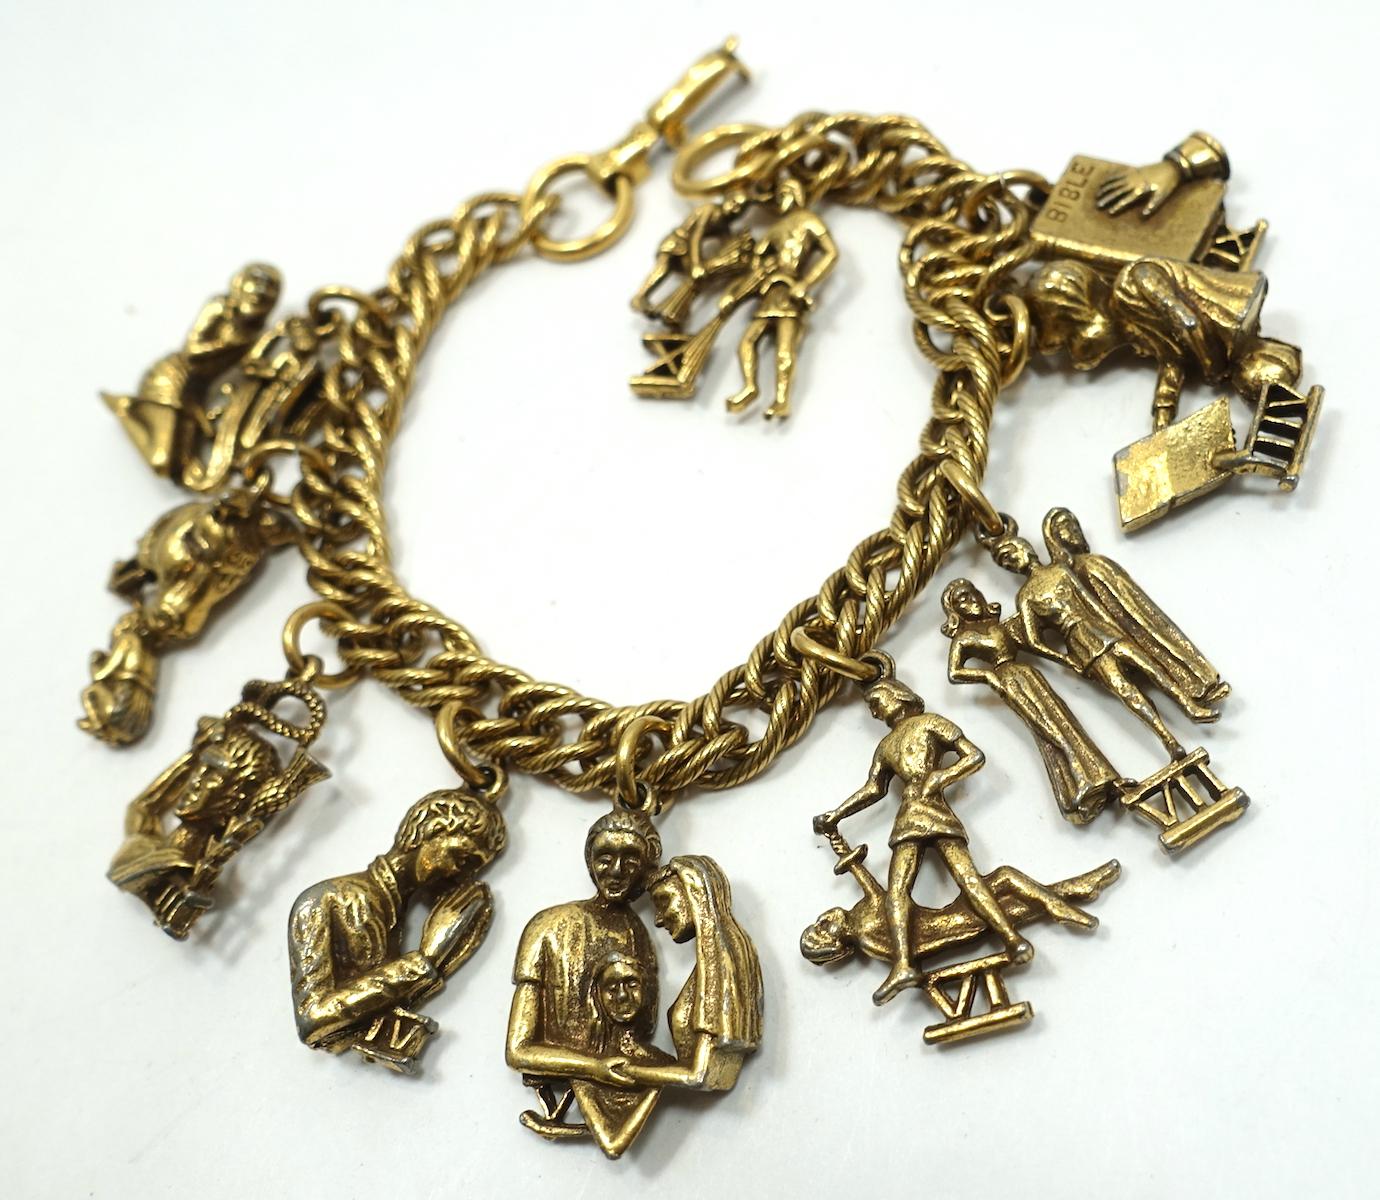 This vintage Coro charm bracelet has the 10 Commandments hanging from an open gold tone link bracelet. The bracelet measures 7” long with a fold-over clasp. The largest charm is 1” x 3/4”.  It is signed “Coro” and is in excellent condition.